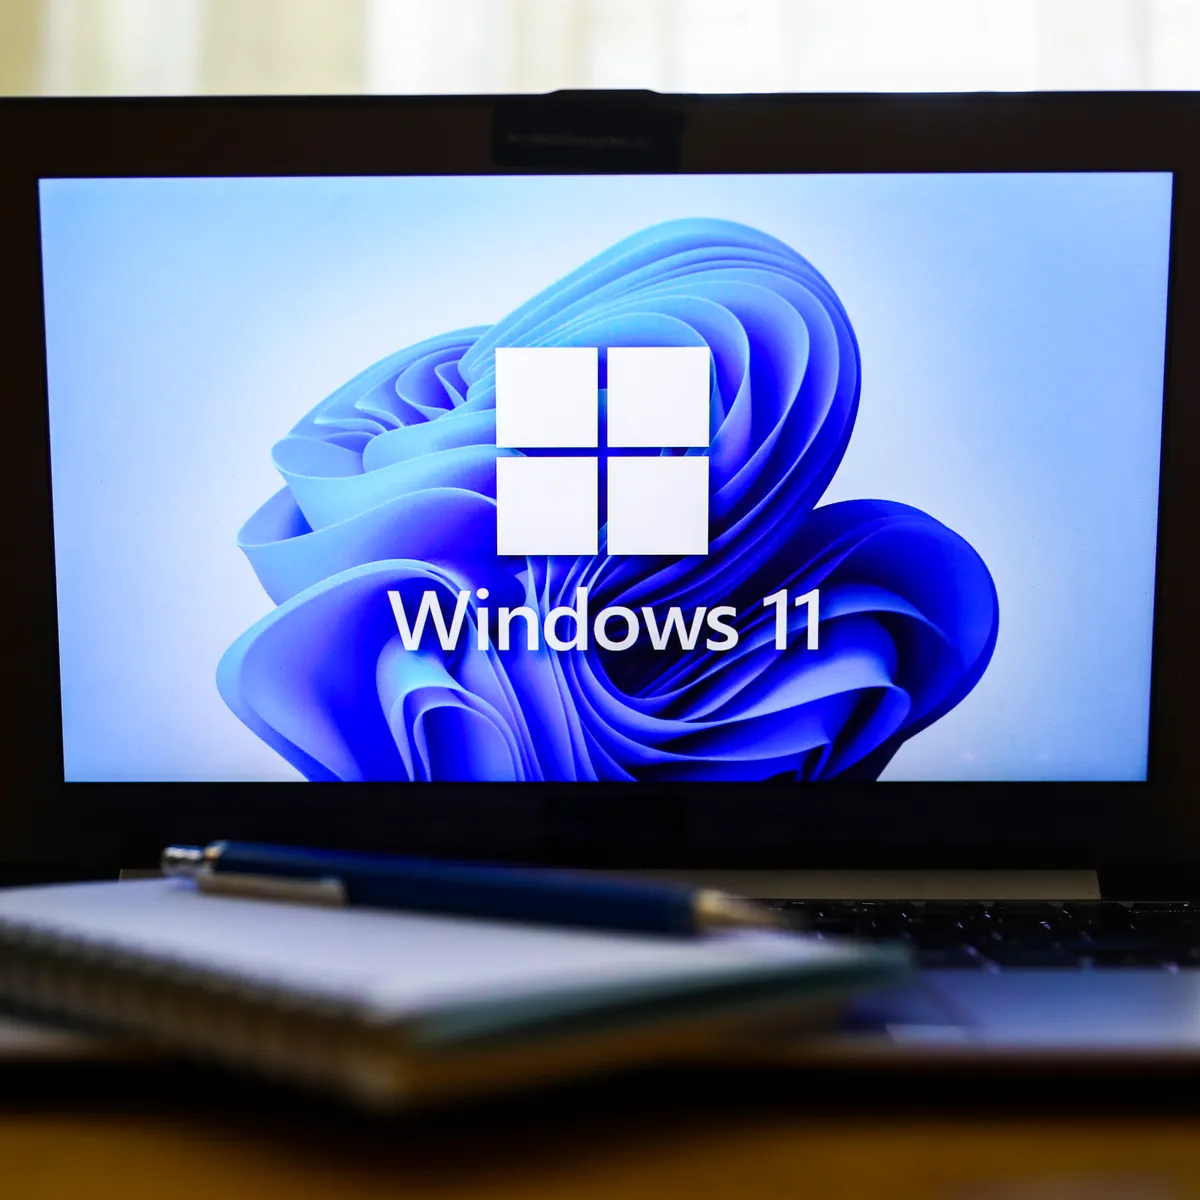 Windows 11's Cool New Update: How It's Making Your PC Smarter and Your Life Easier